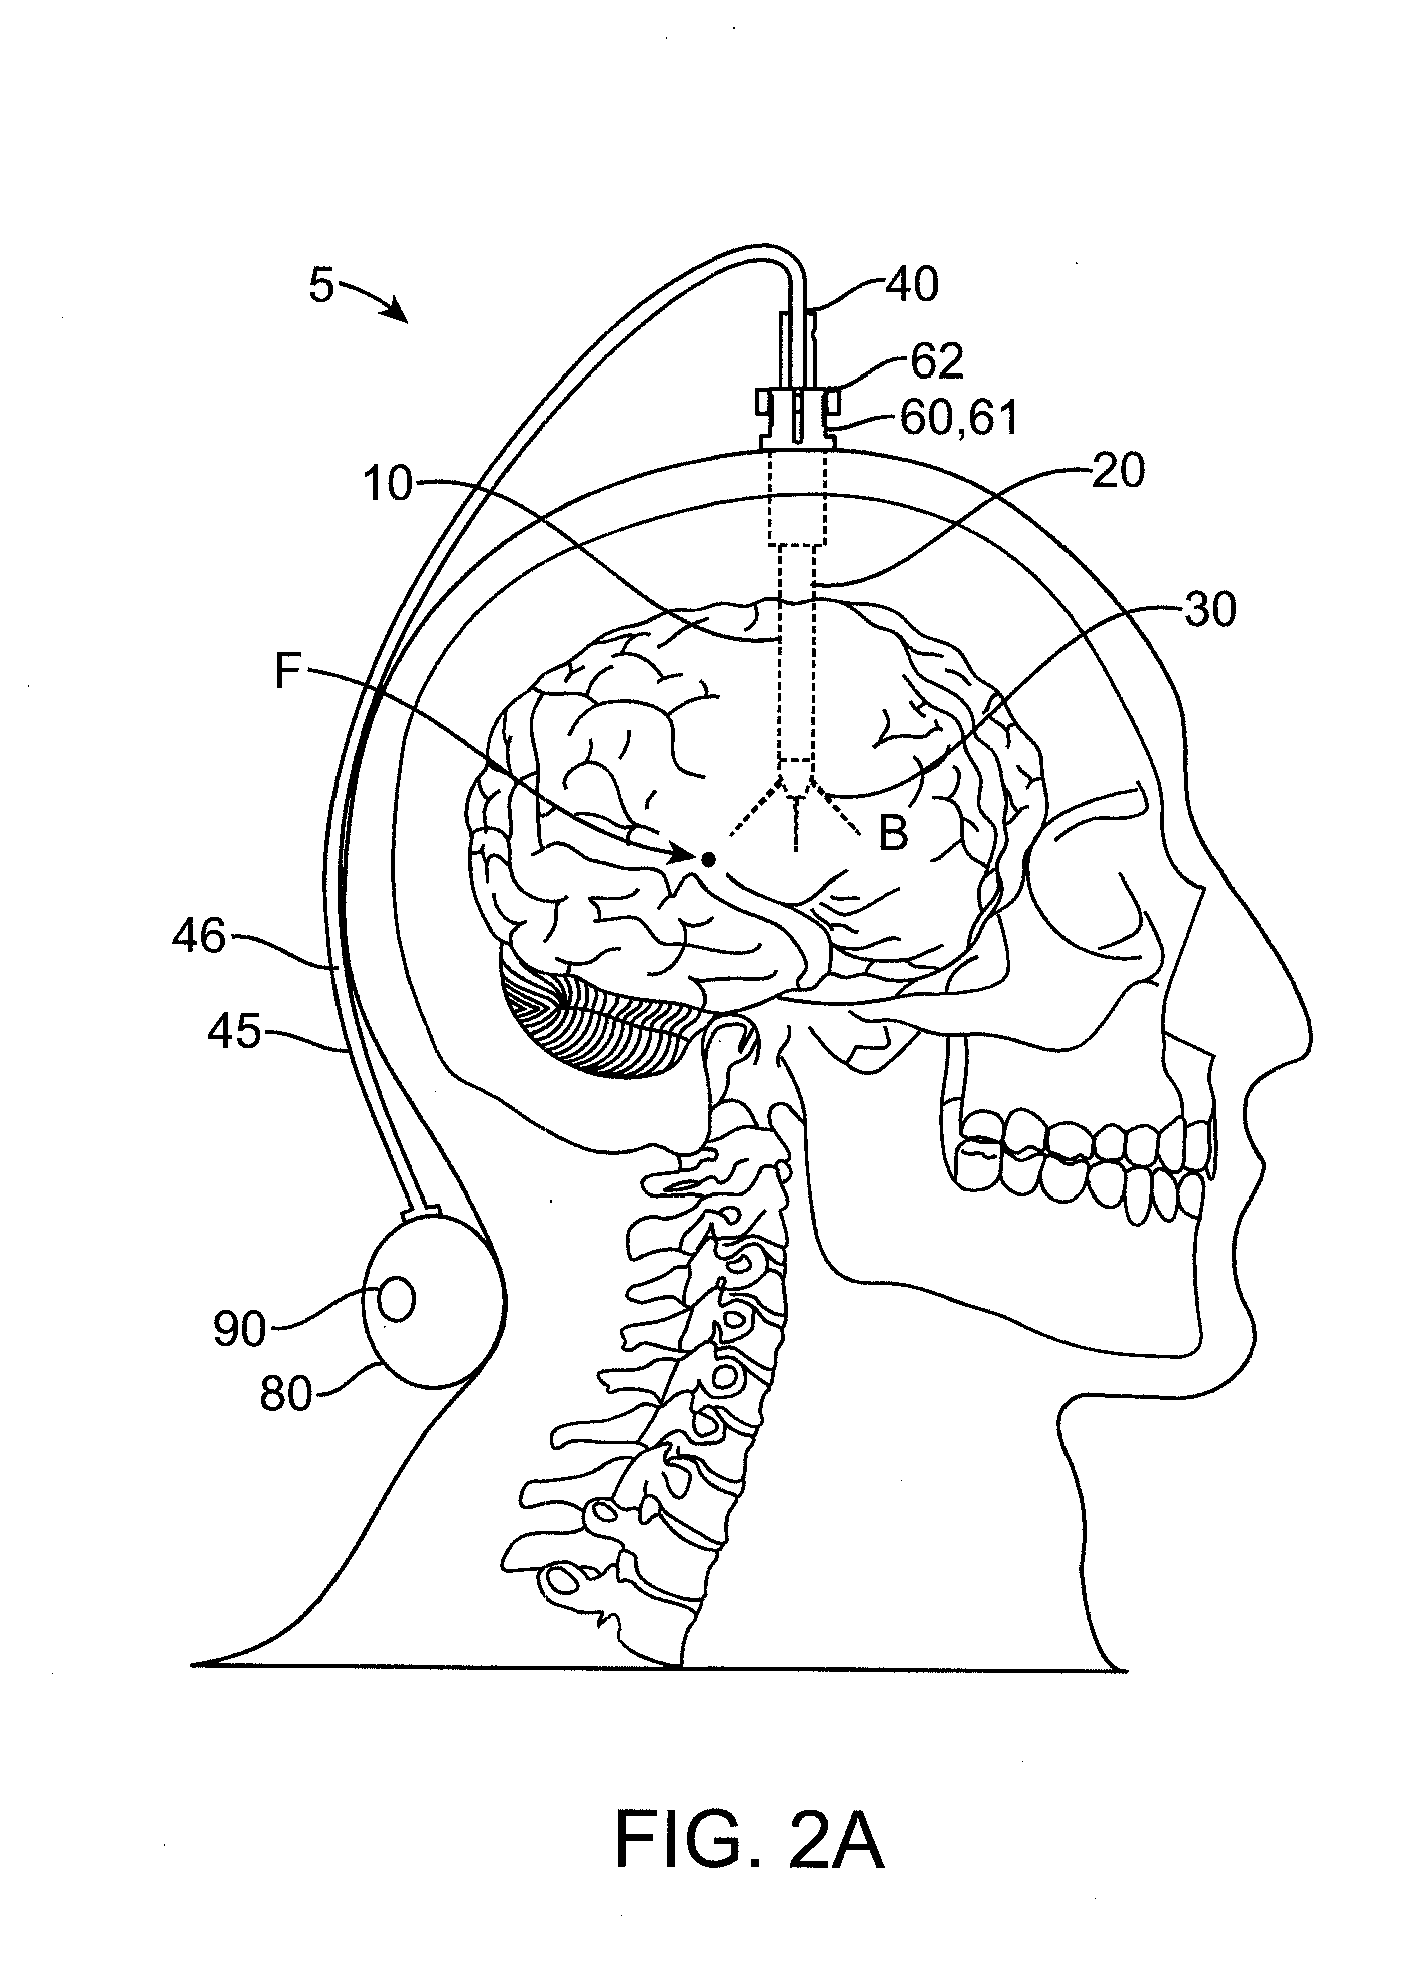 Apparatus, systems and methods for delivery of medication to the brain to treat neurological conditions